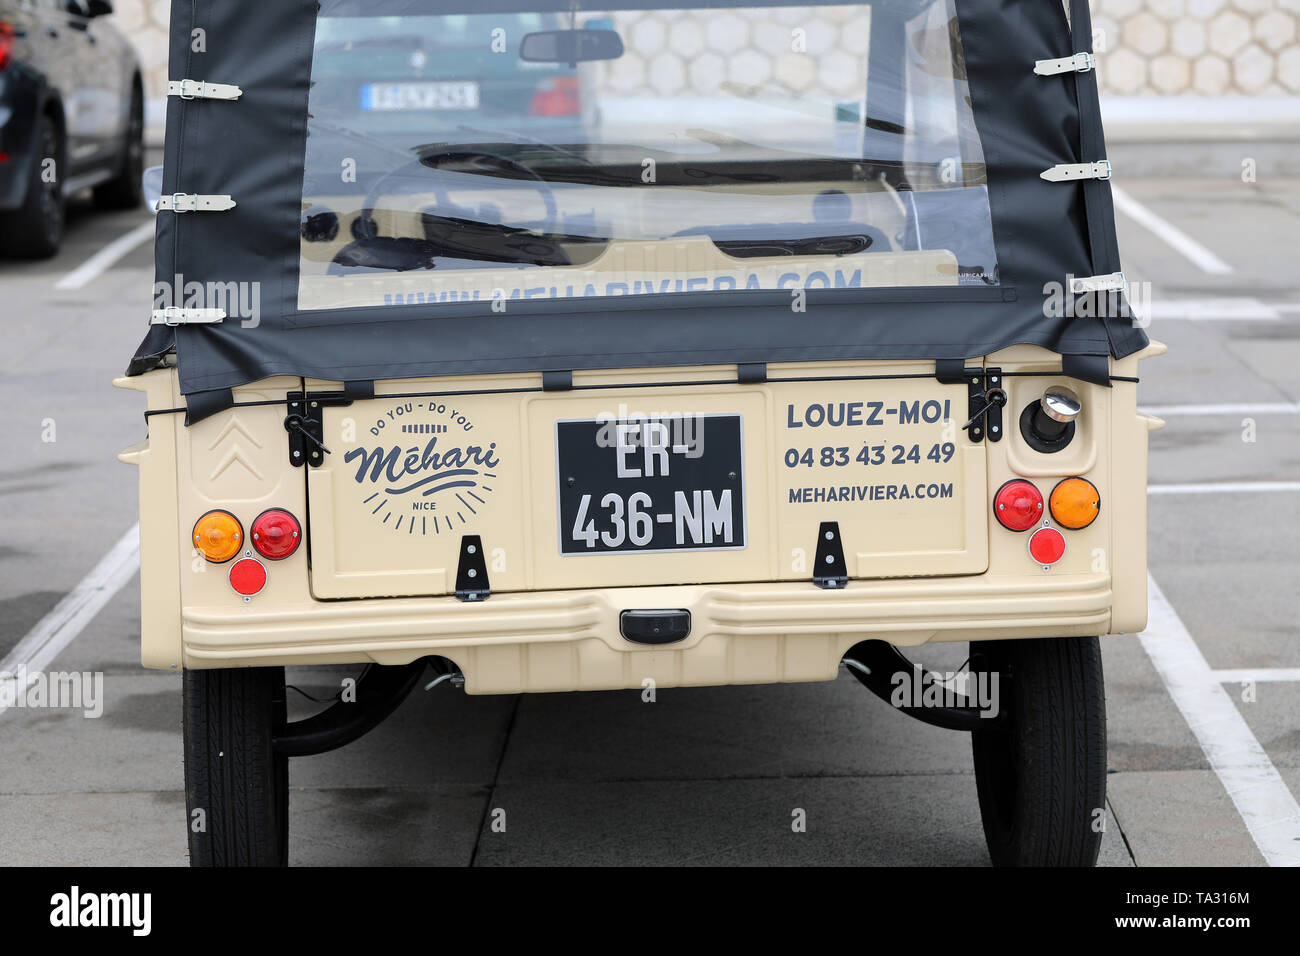 Nice, France - May 21, 2019: Vintage Beige Citroen Mehari (Rear View) French Car Parked In A Parking Lot In Nice On The French Riviera Stock Photo